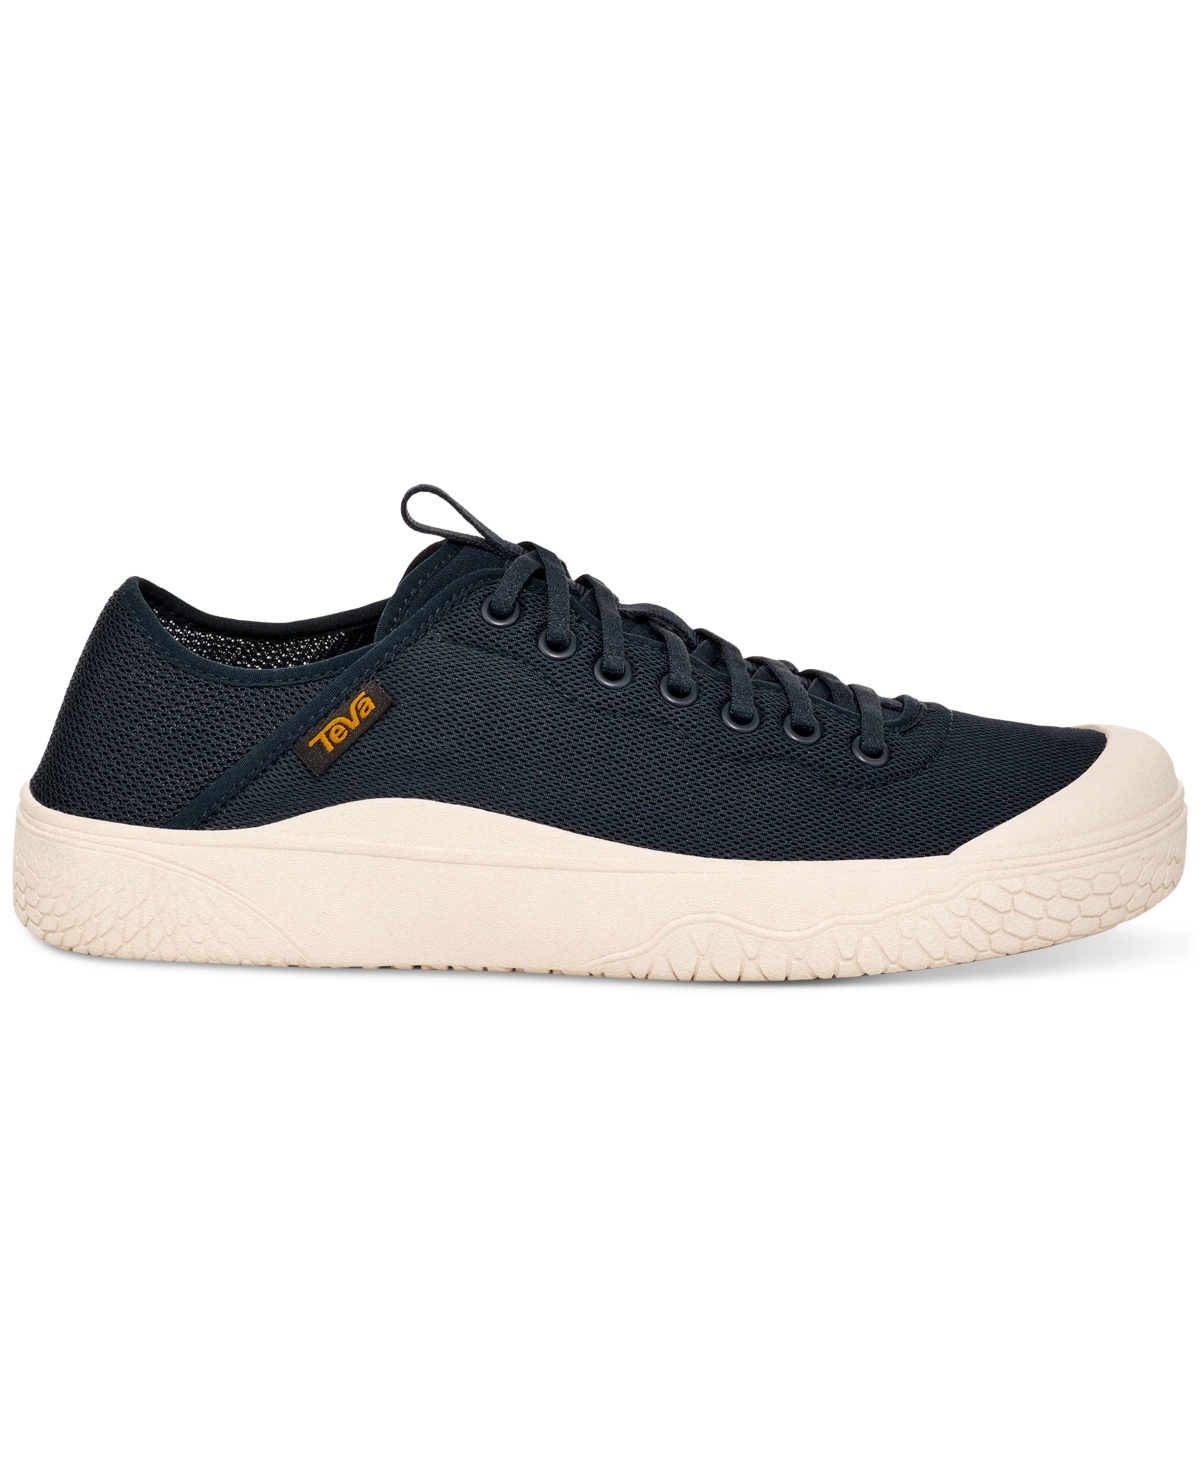 Men's Terra Canyon Mesh Lace Up Sneakers - Total Eclipse